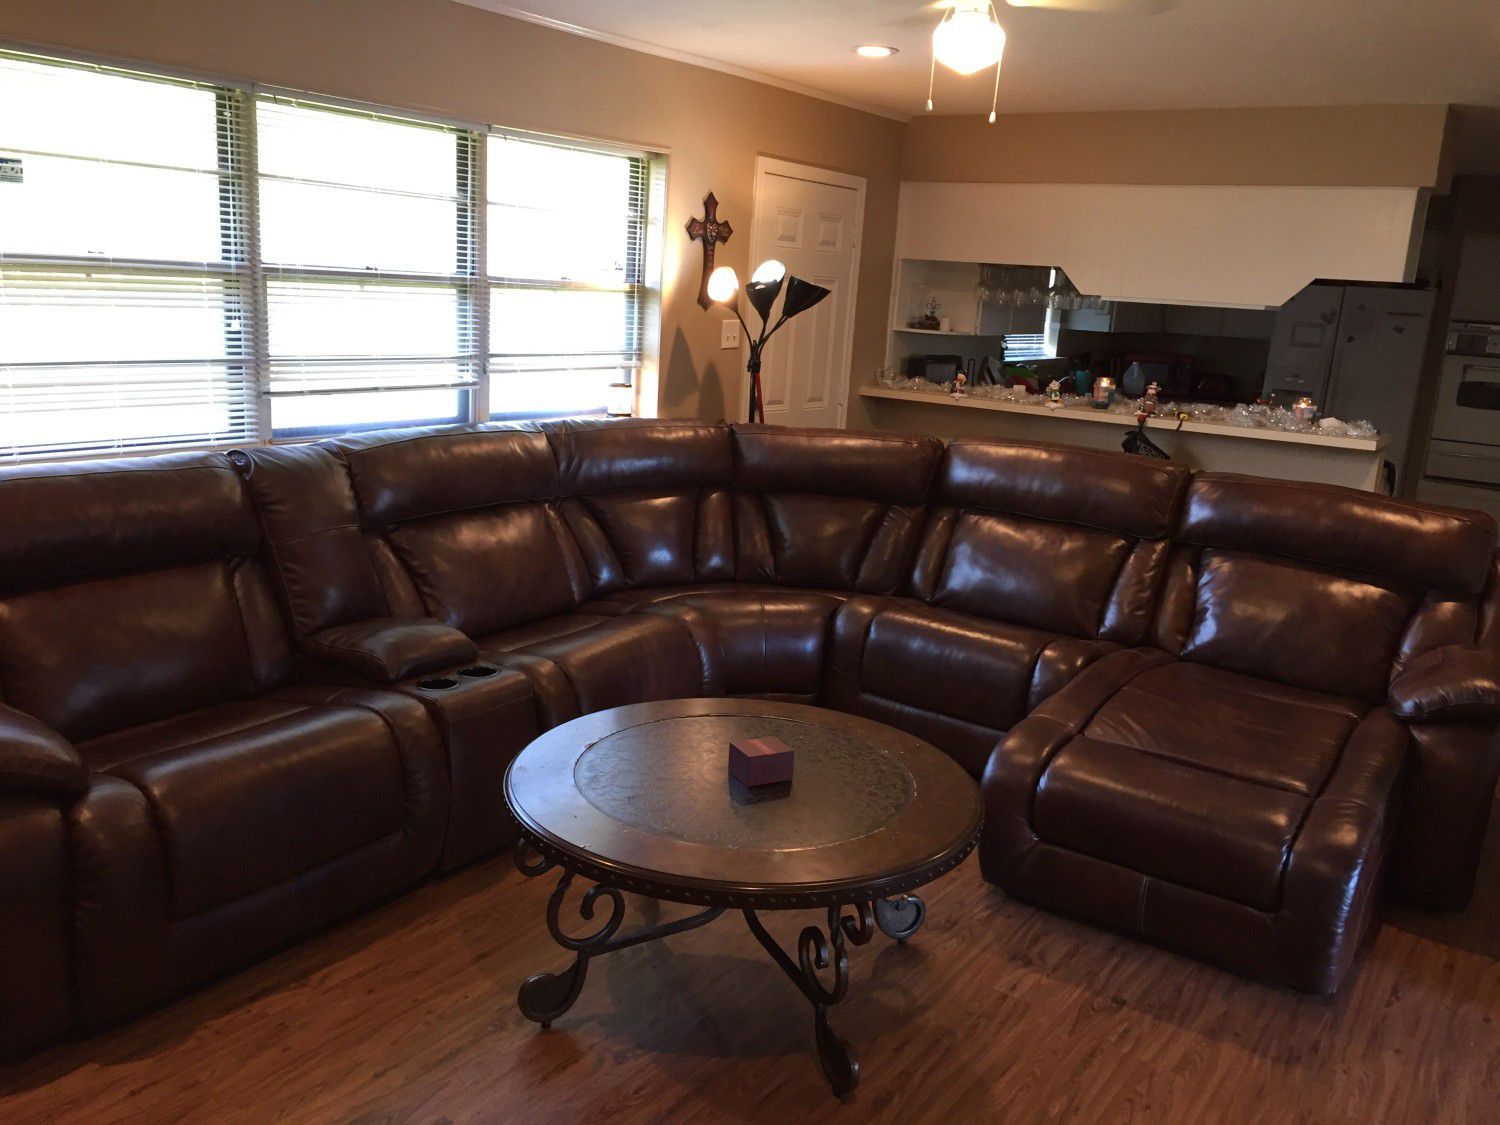 Genuine leather couches, dining set, kitchen appliances and side tables